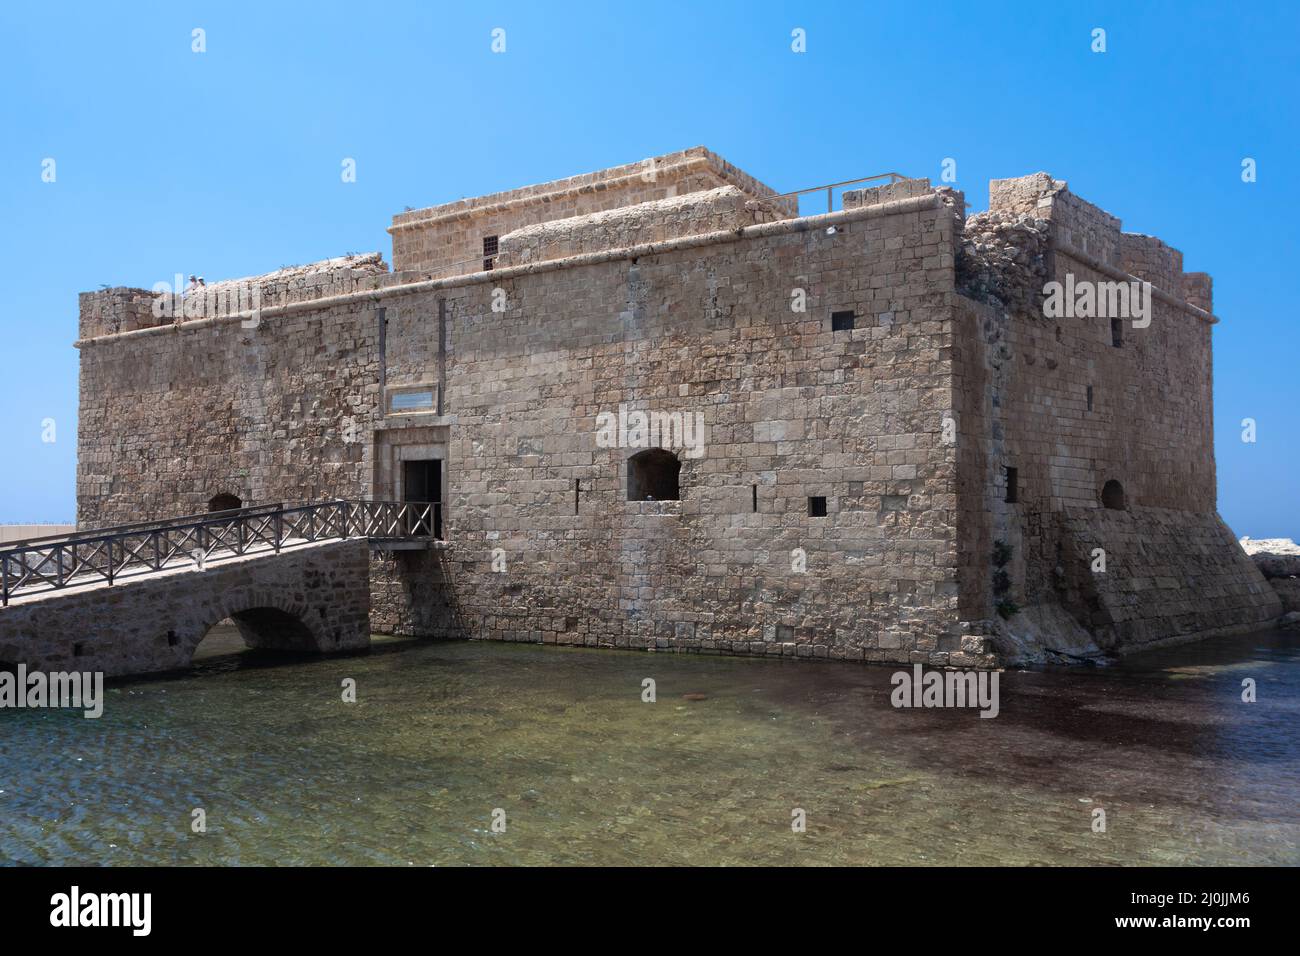 PAPHOS, CYPRUS, GREECE - JULY 22 : Old fort at Paphos Cyprus on July 22. Stock Photo